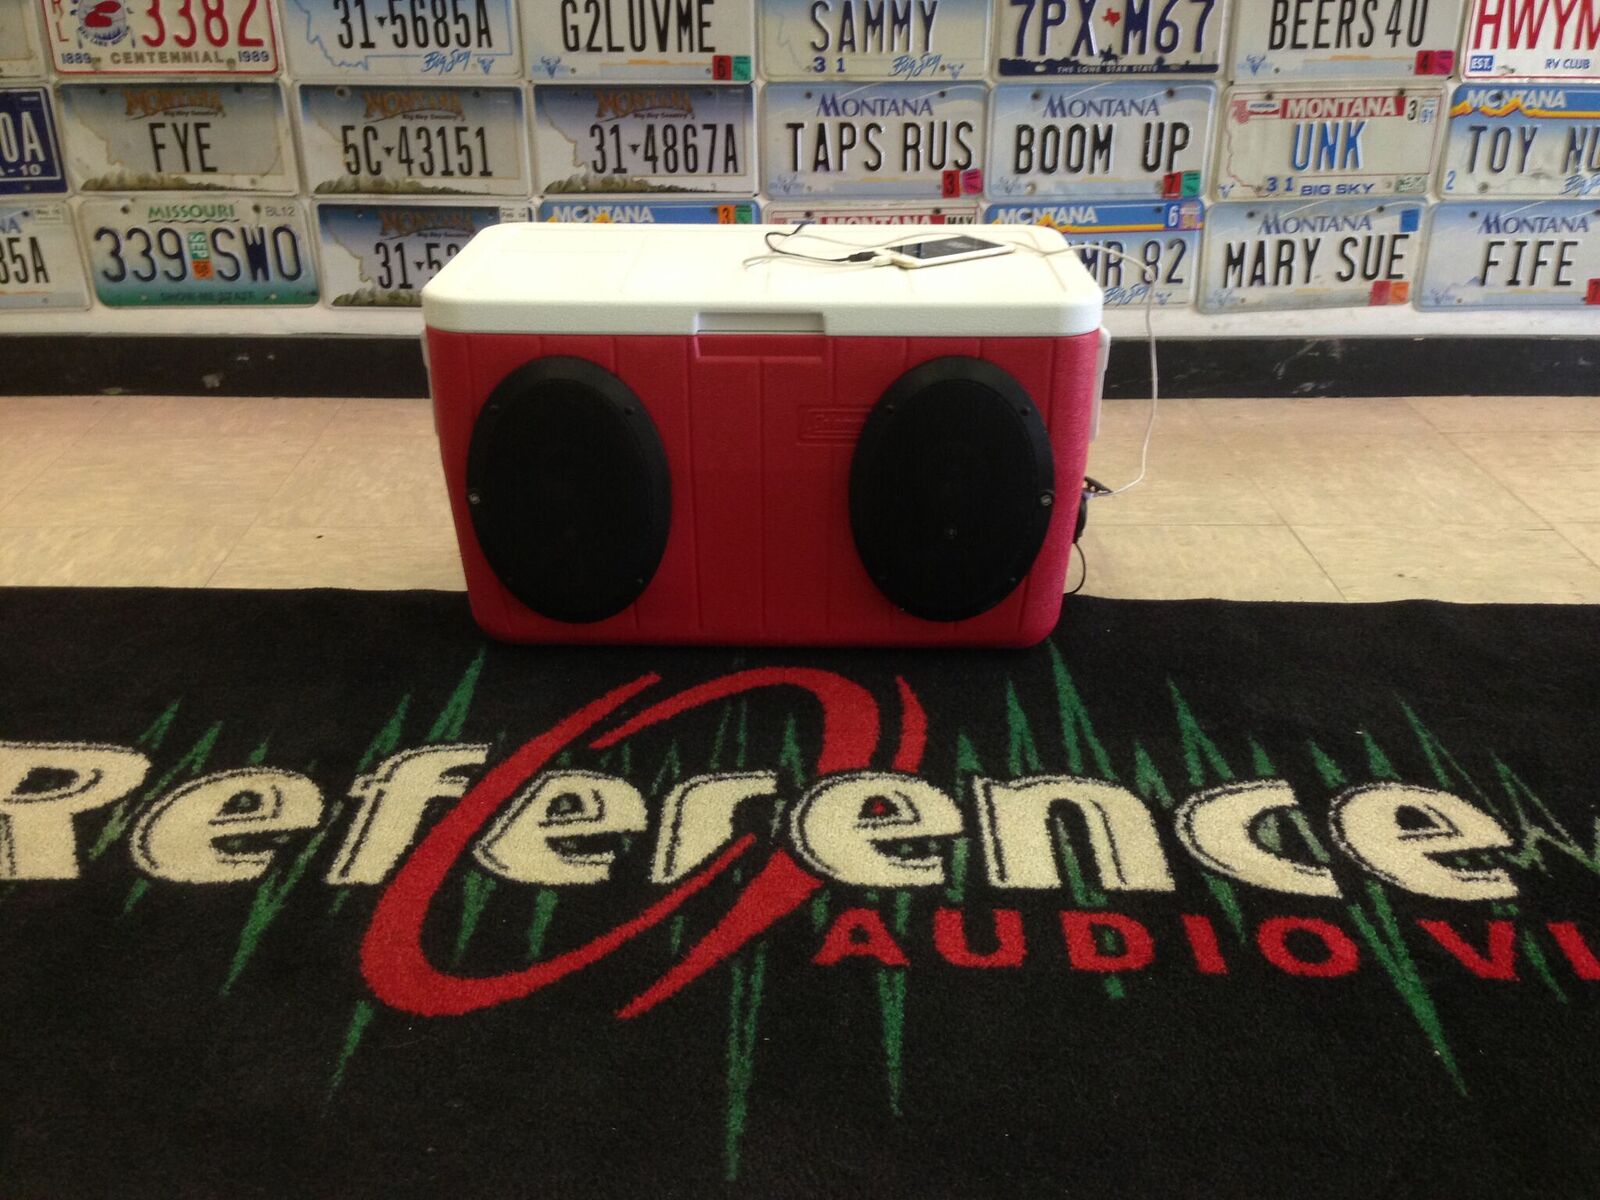 Reference Audio Video. Remote Car Starts. Car Audio Video. Marine. Lighting And More.